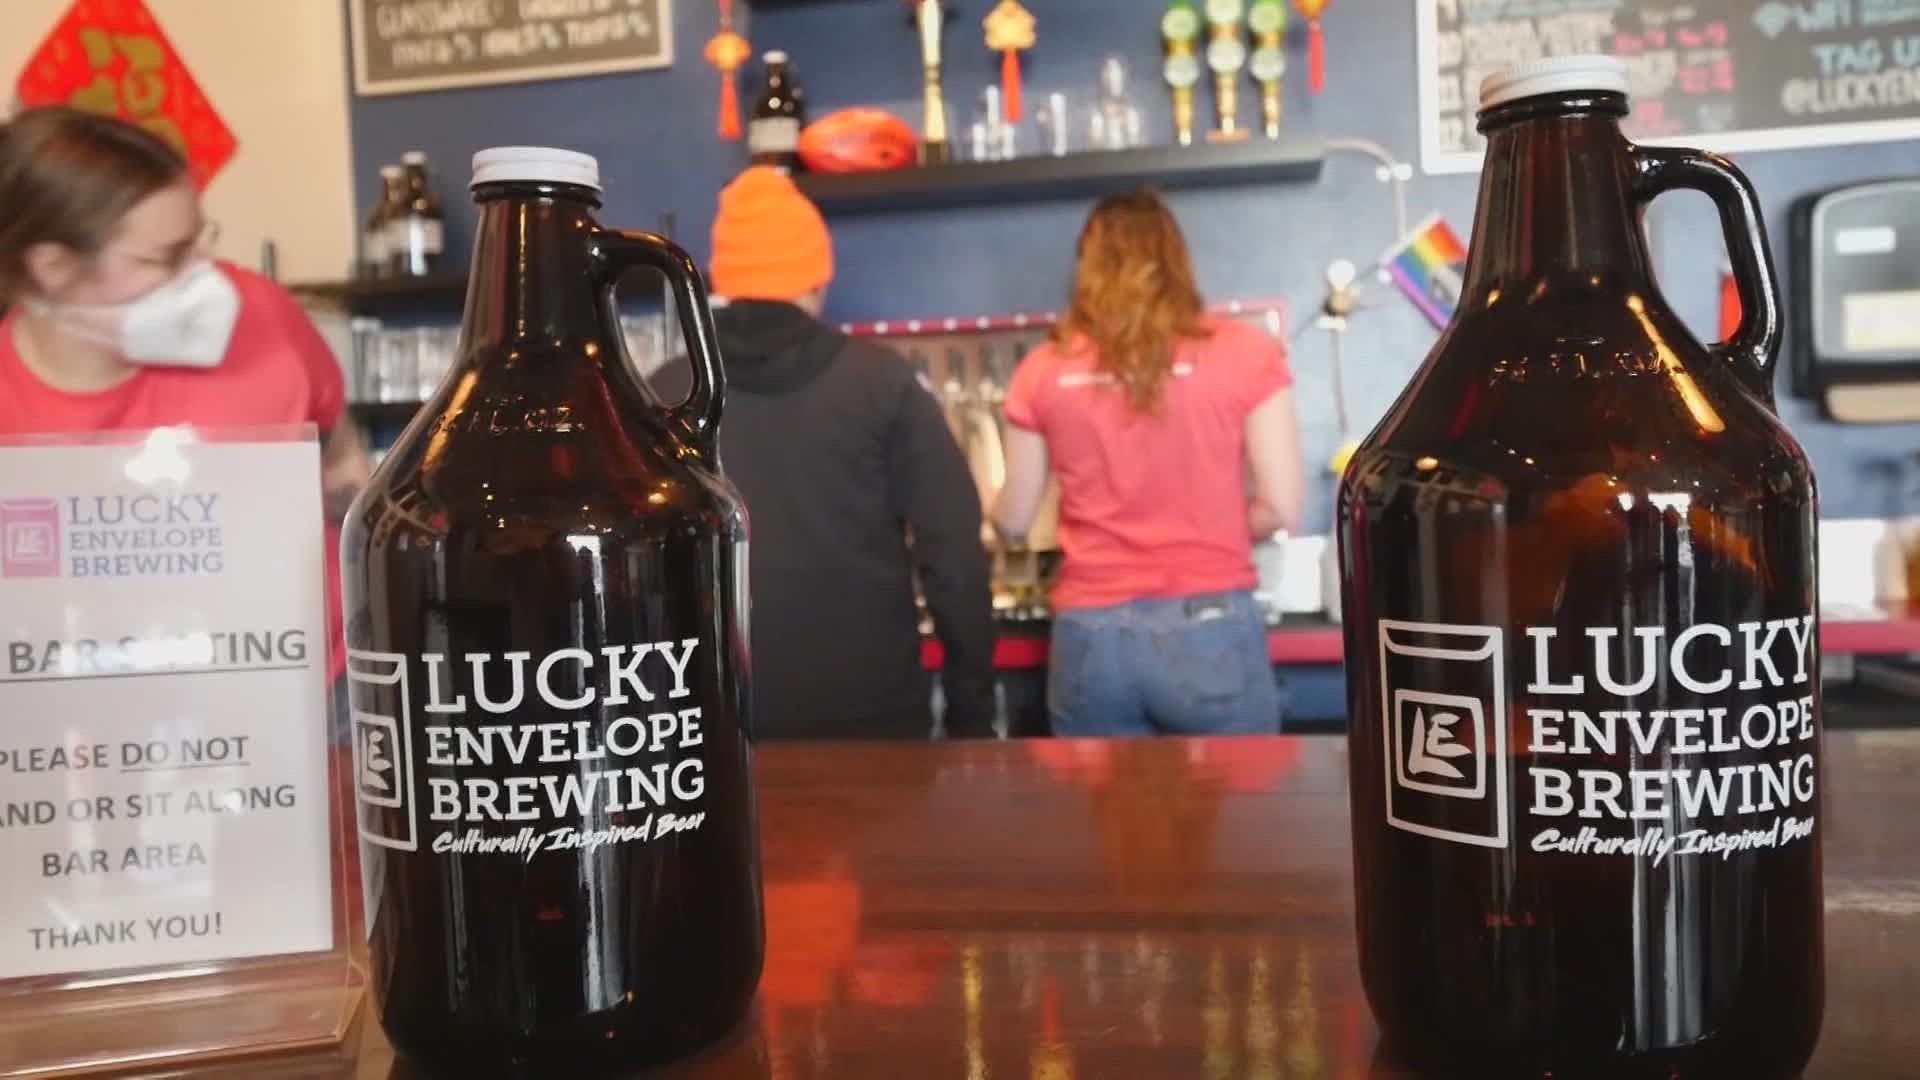 Jake and Mimi visit Seattle's "Lucky Envelope Brewing" to try their new Lunar New Year inspired flavors